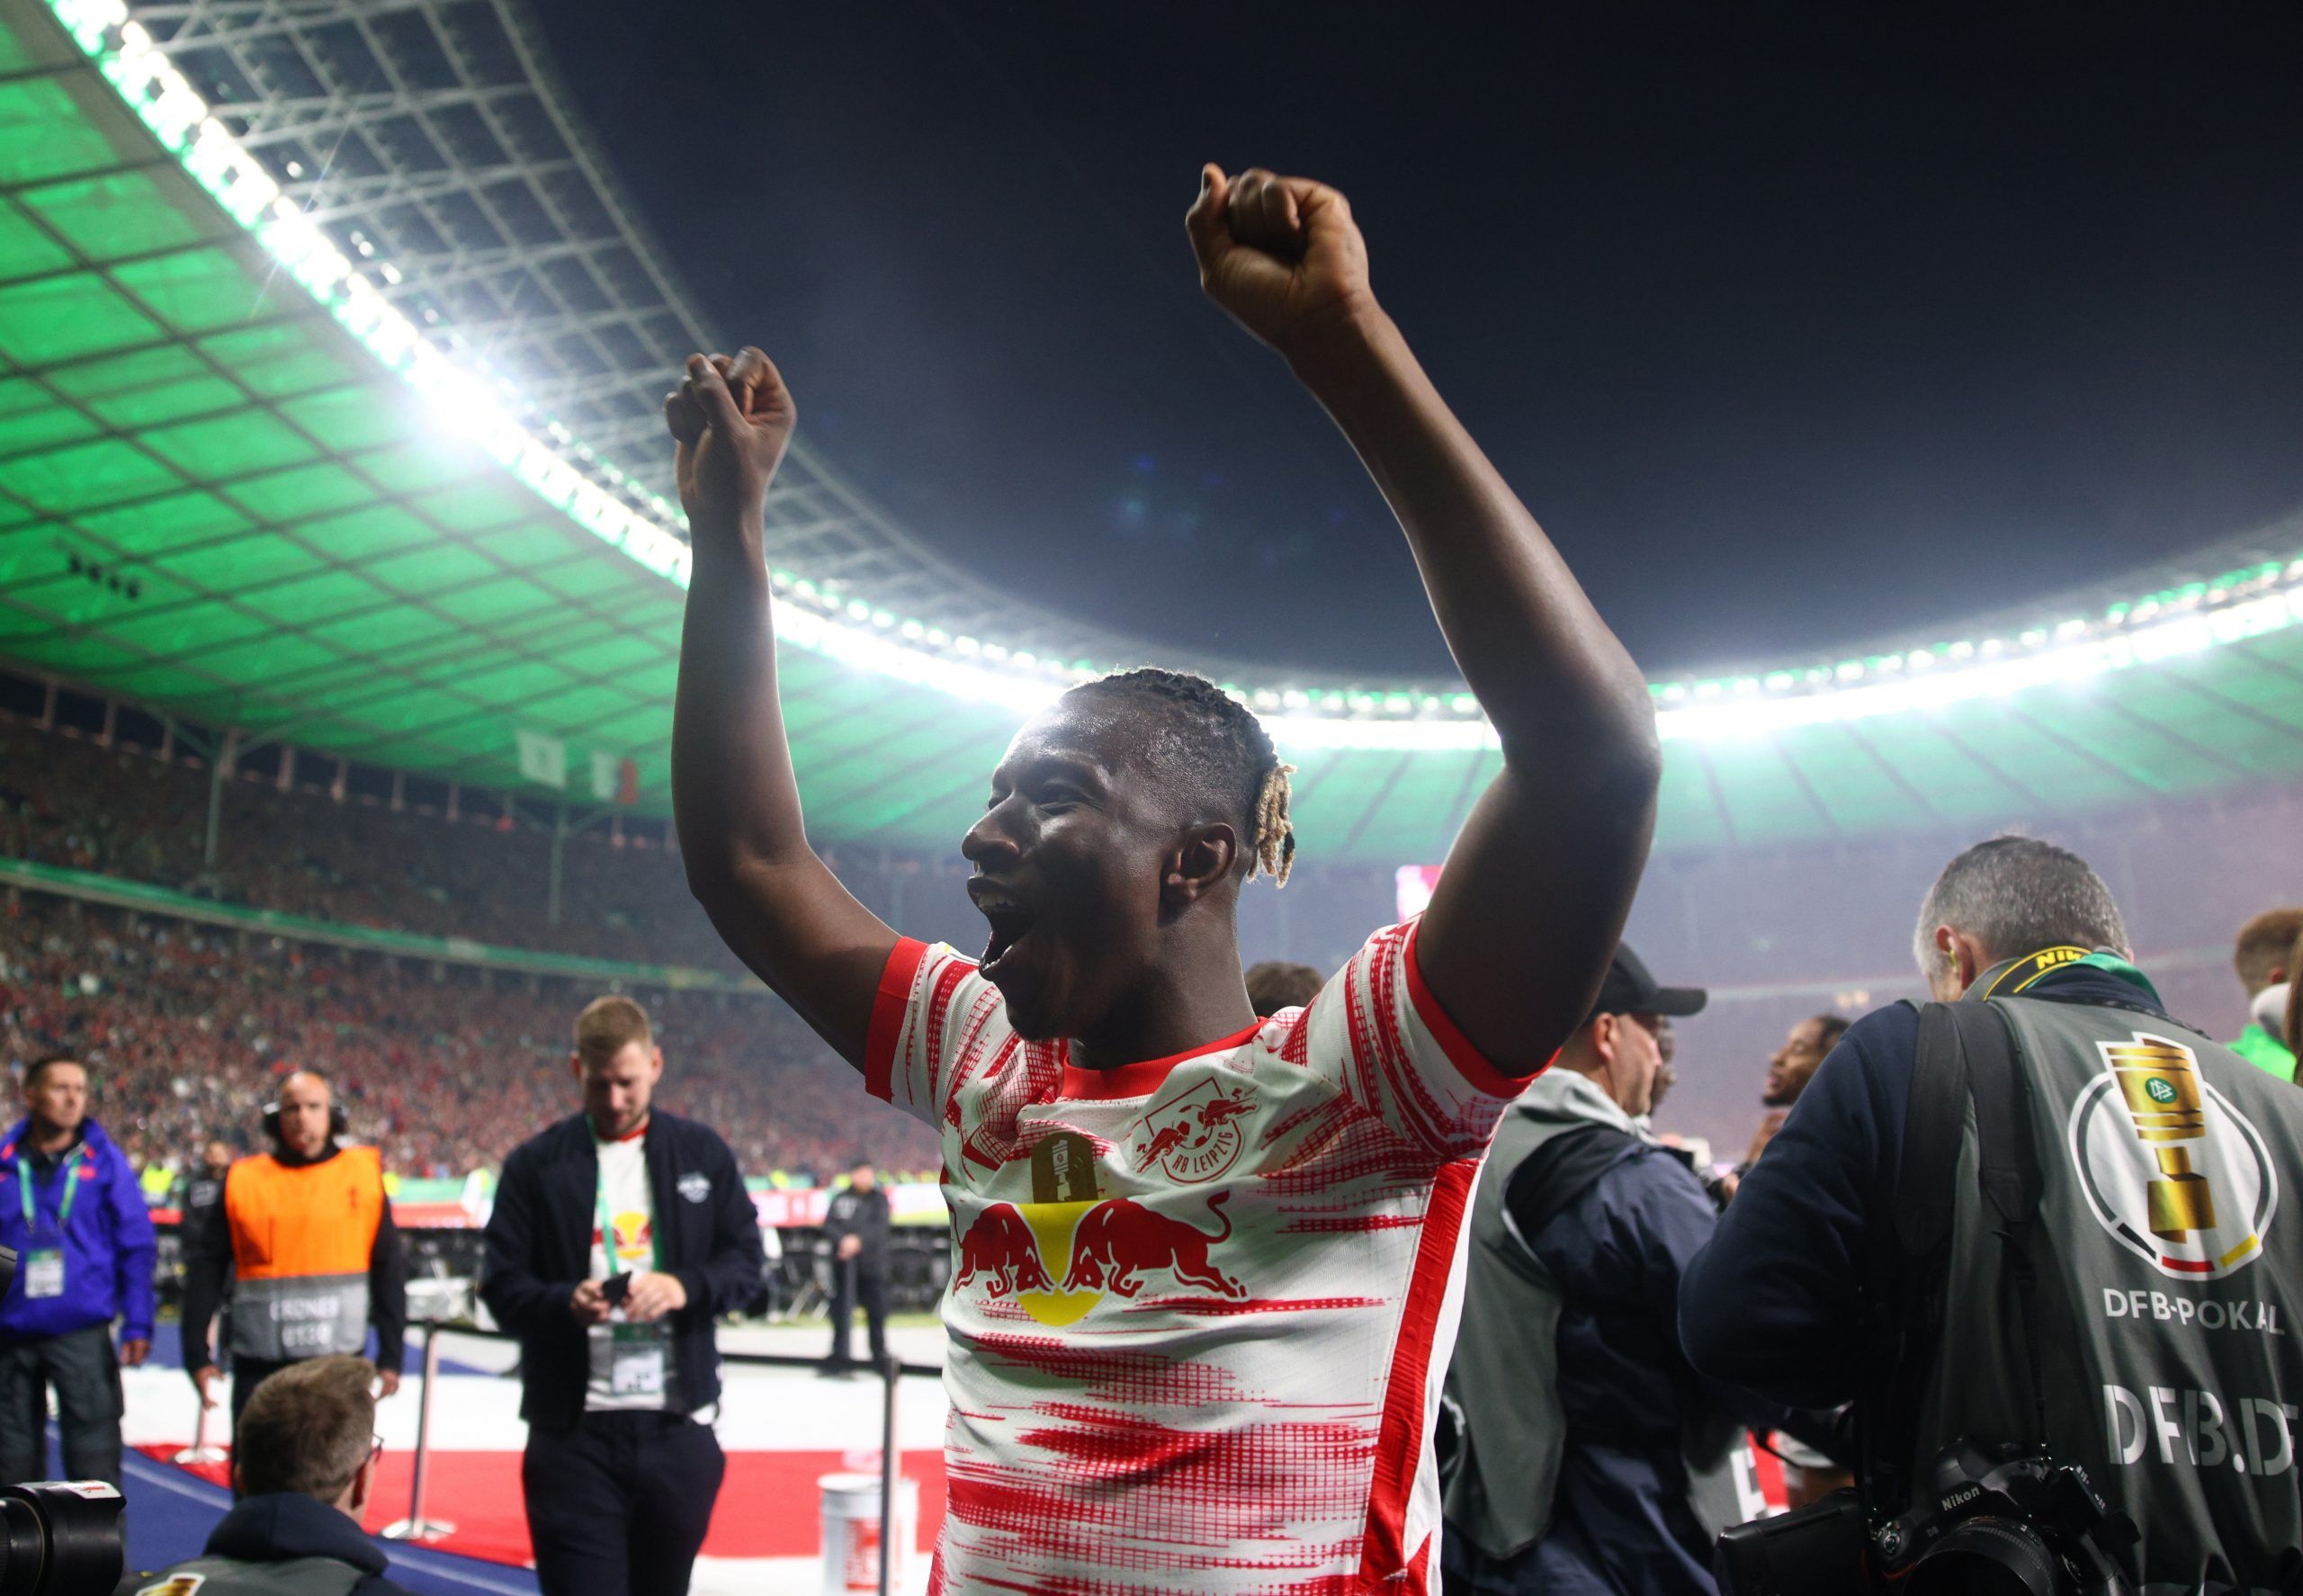 Soccer Football - DFB Cup - Final - SC Freiburg v RB Leipzig - Olympiastadion, Berlin, Germany - May 21, 2022  RB Leipzig's Amadou Haidara celebrates after winning the DFB Cup REUTERS/Lisi Niesner DFB REGULATIONS PROHIBIT ANY USE OF PHOTOGRAPHS AS IMAGE SEQUENCES AND/OR QUASI-VIDEO.